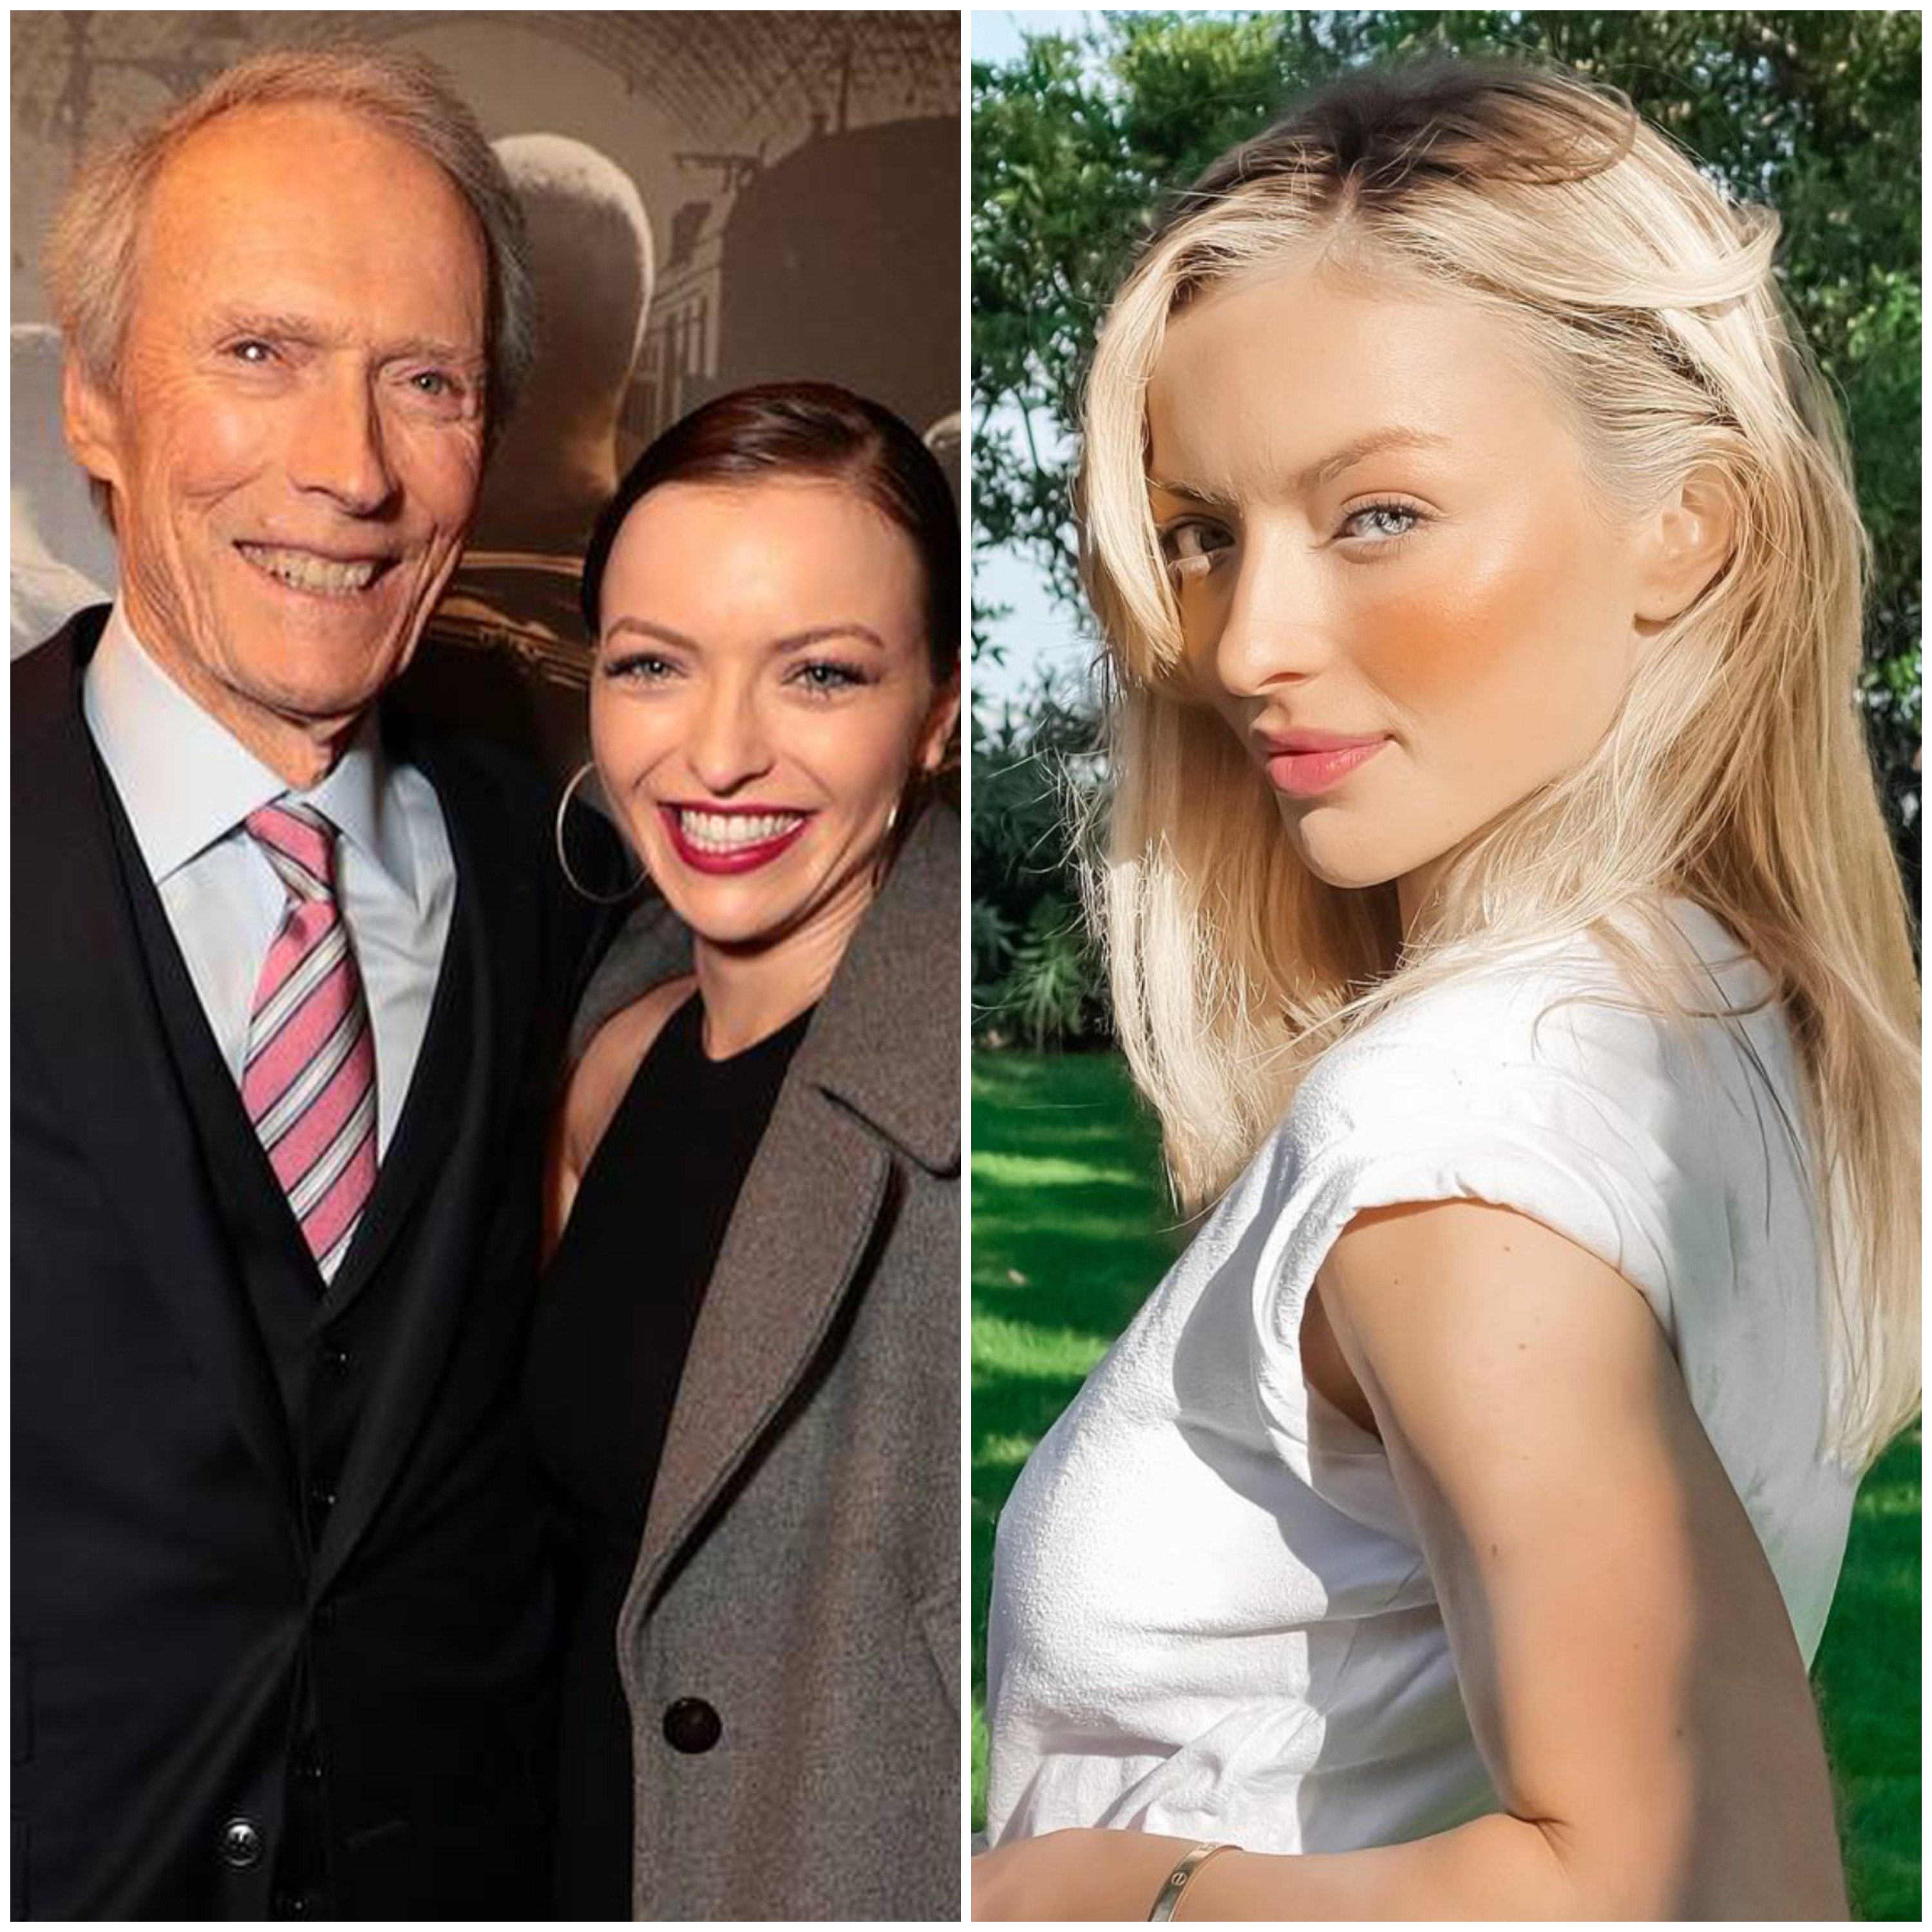 Clint Eastwood’s only daughter with Francis Fisher, Francesca Eastwood, is now 30 years old. Photos: @francescaeastwood/Instagram